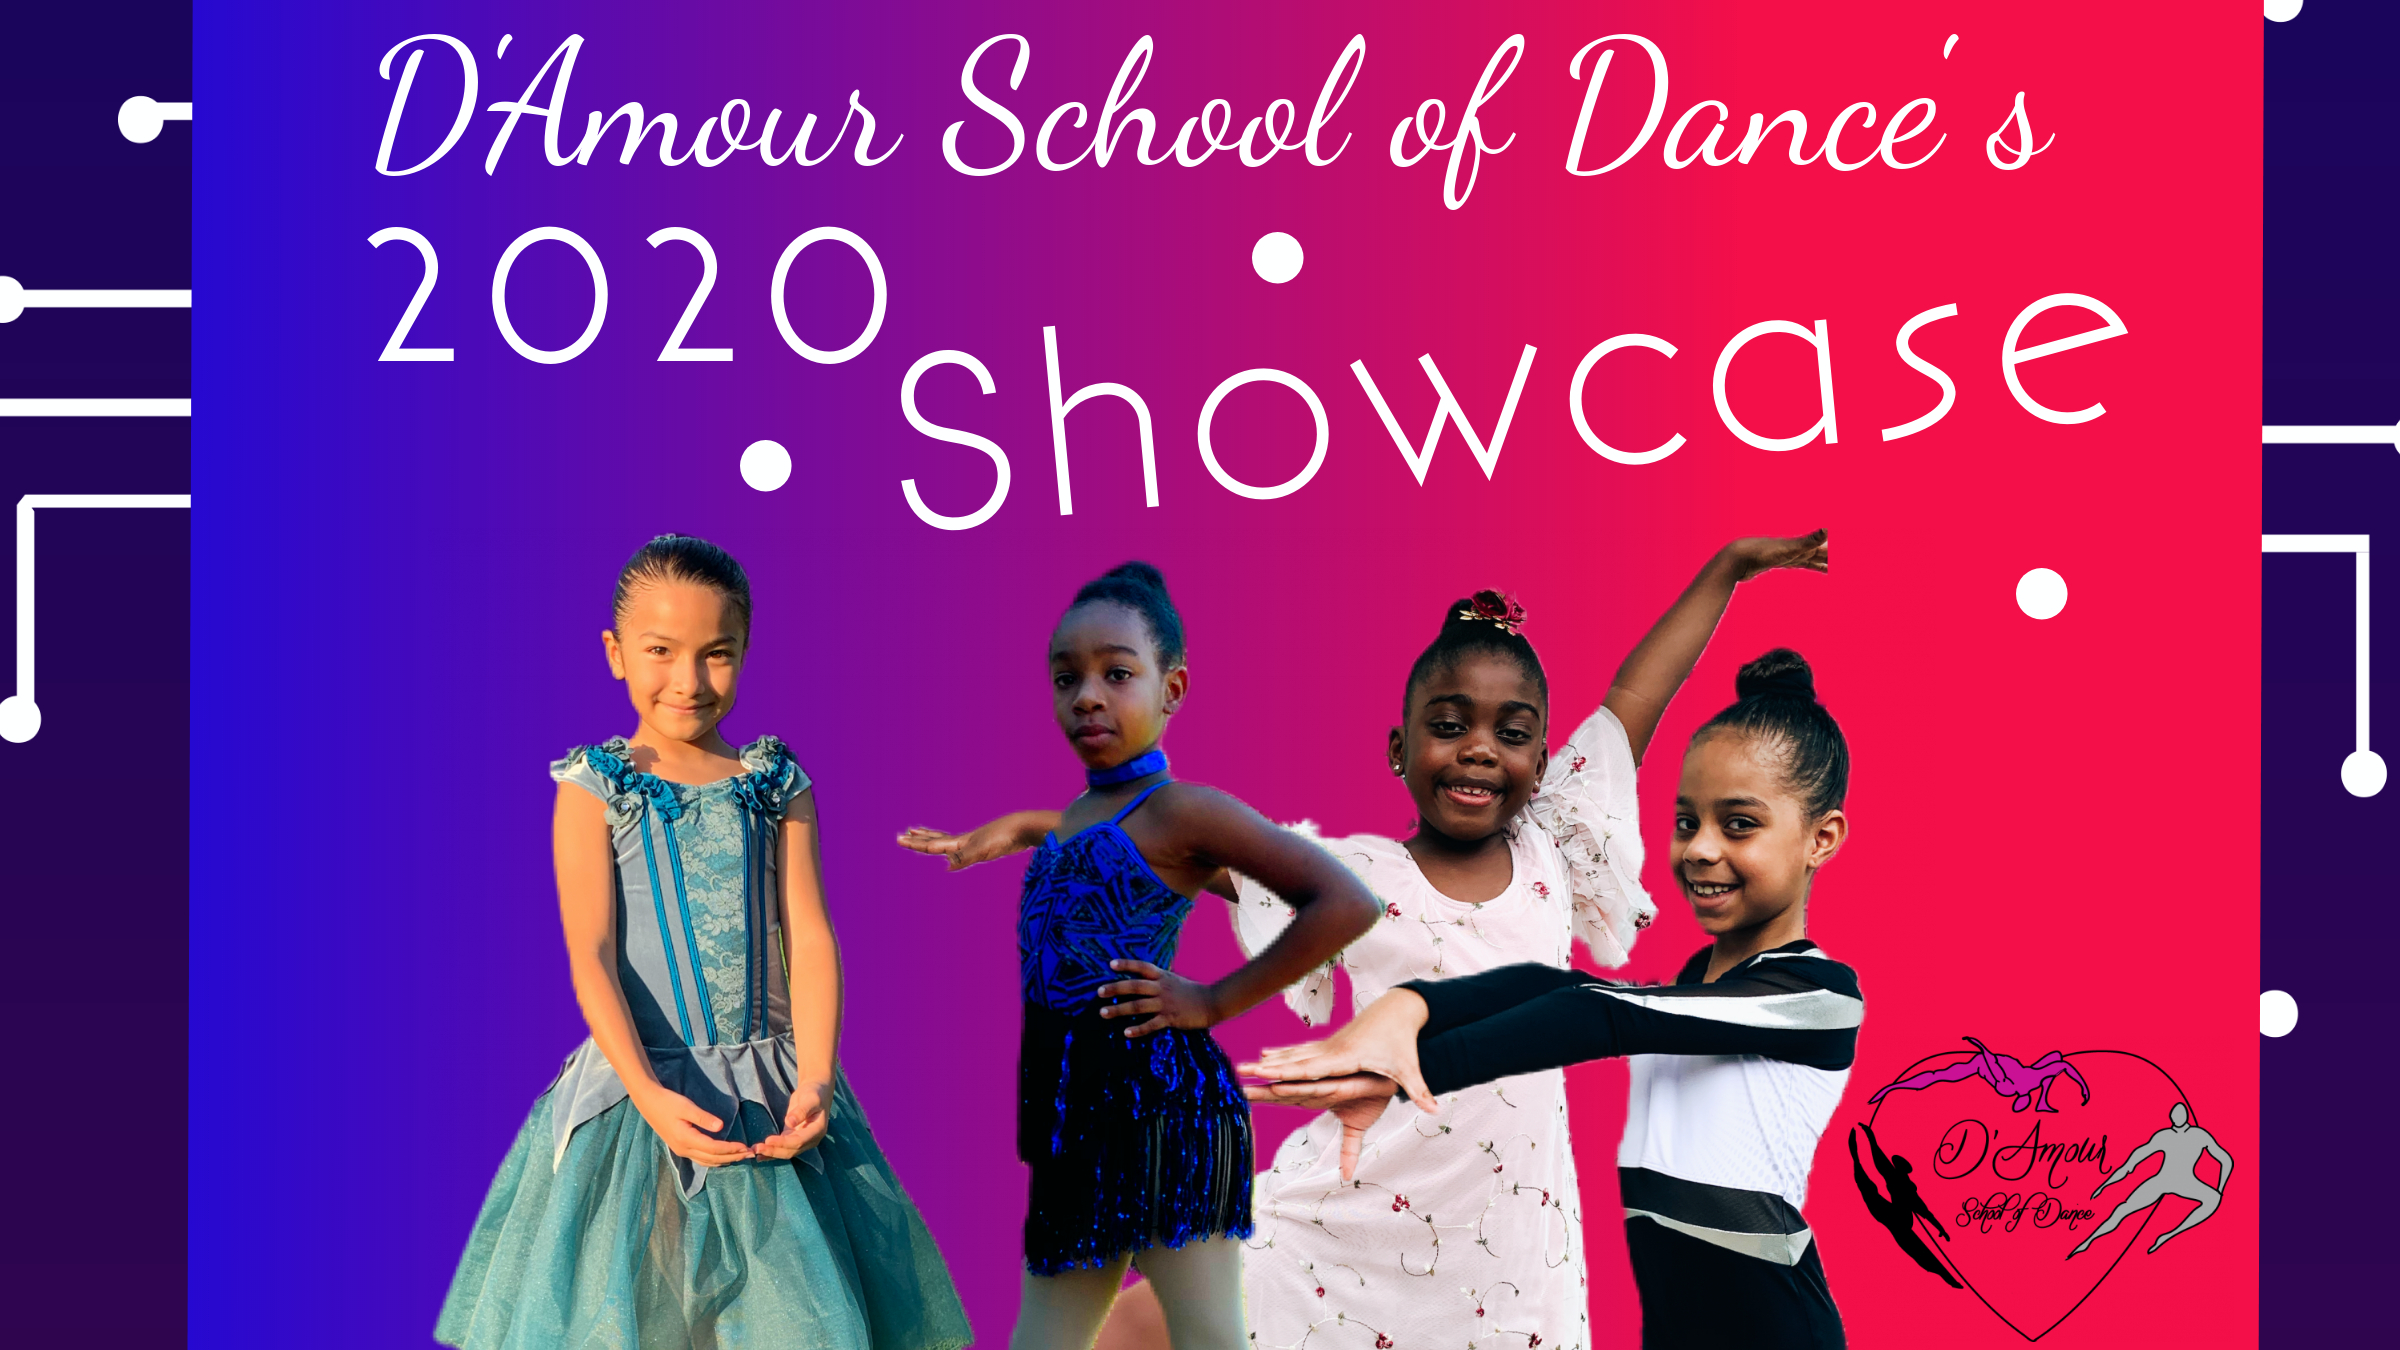 Photo for D'Amour School of Dance's 2020 Virtual Showcase on ViewStub